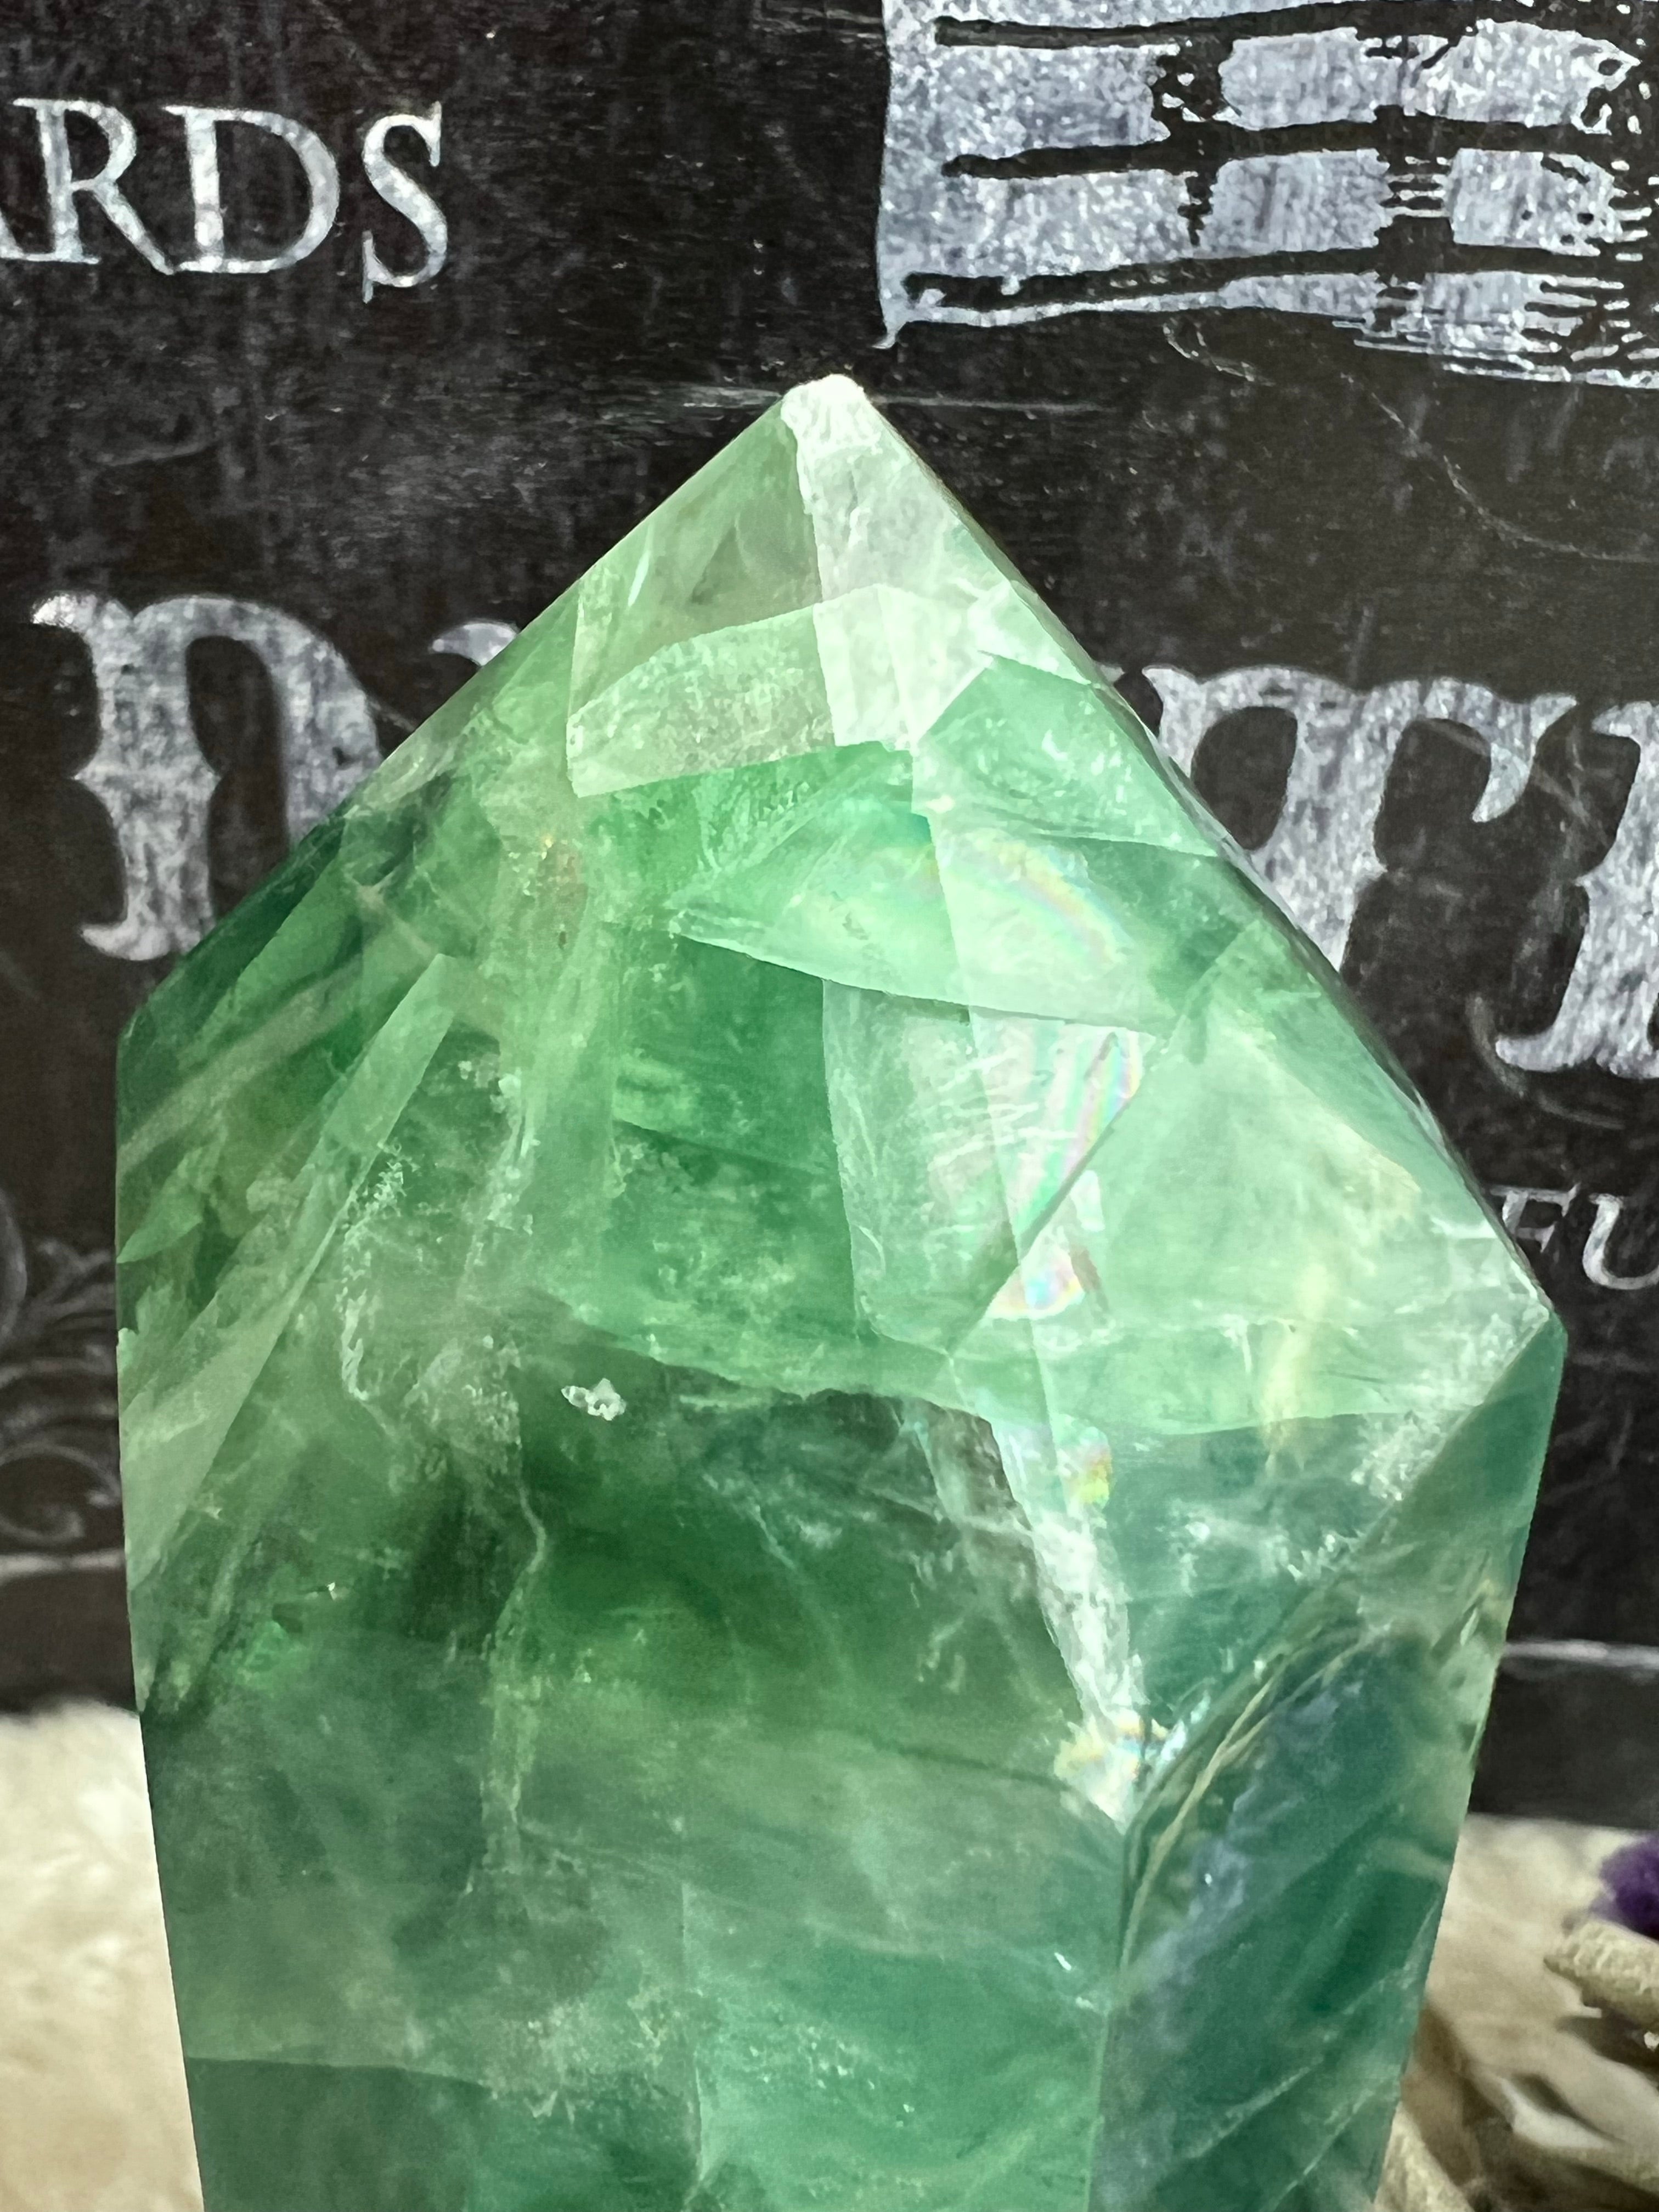 CHIPPED Fluorite with Calcite Tower - Earthly Secrets